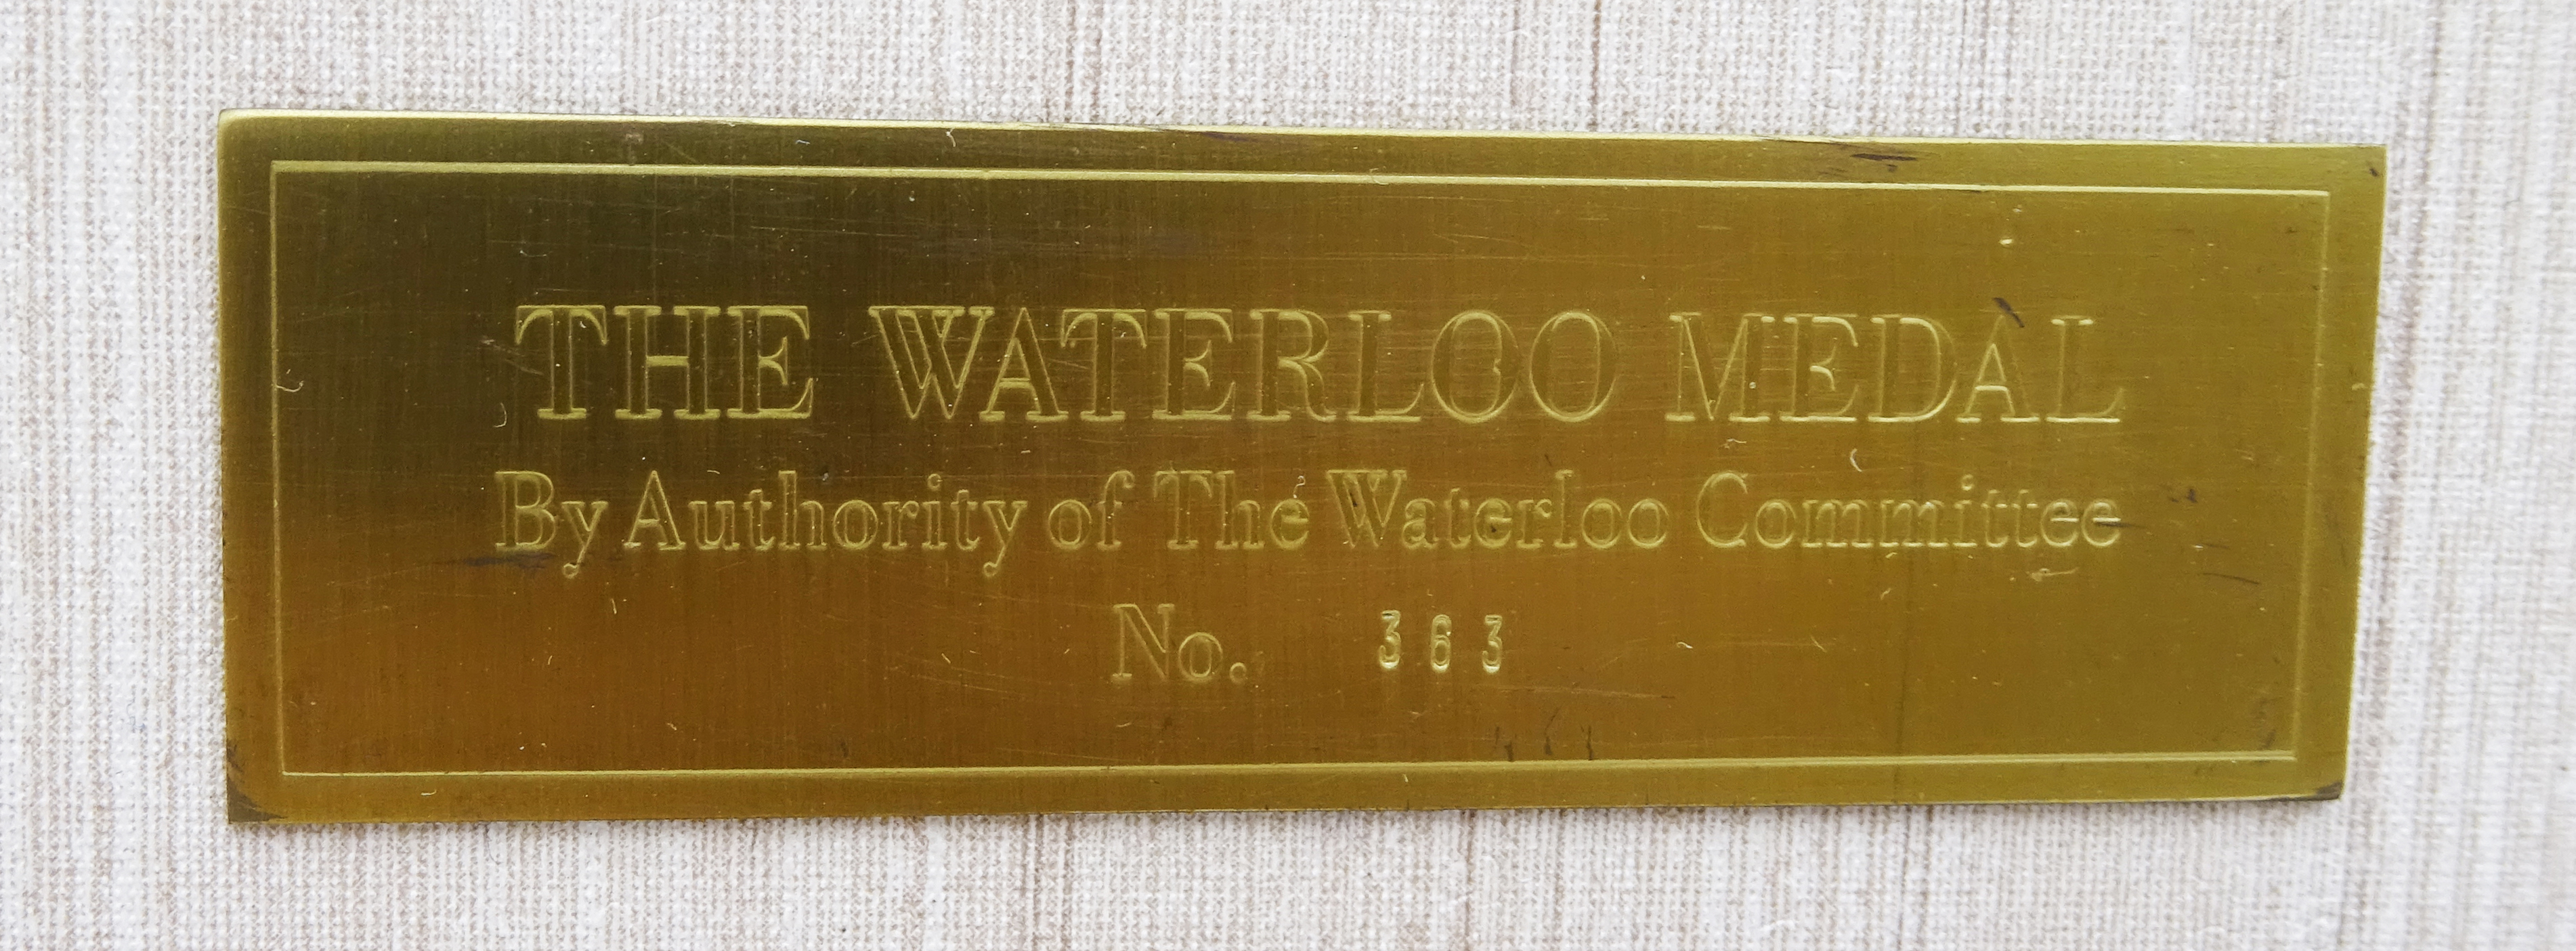 'The Waterloo Medal' fine silver medals commemorating the 160th anniversary of the Battle of - Image 2 of 5